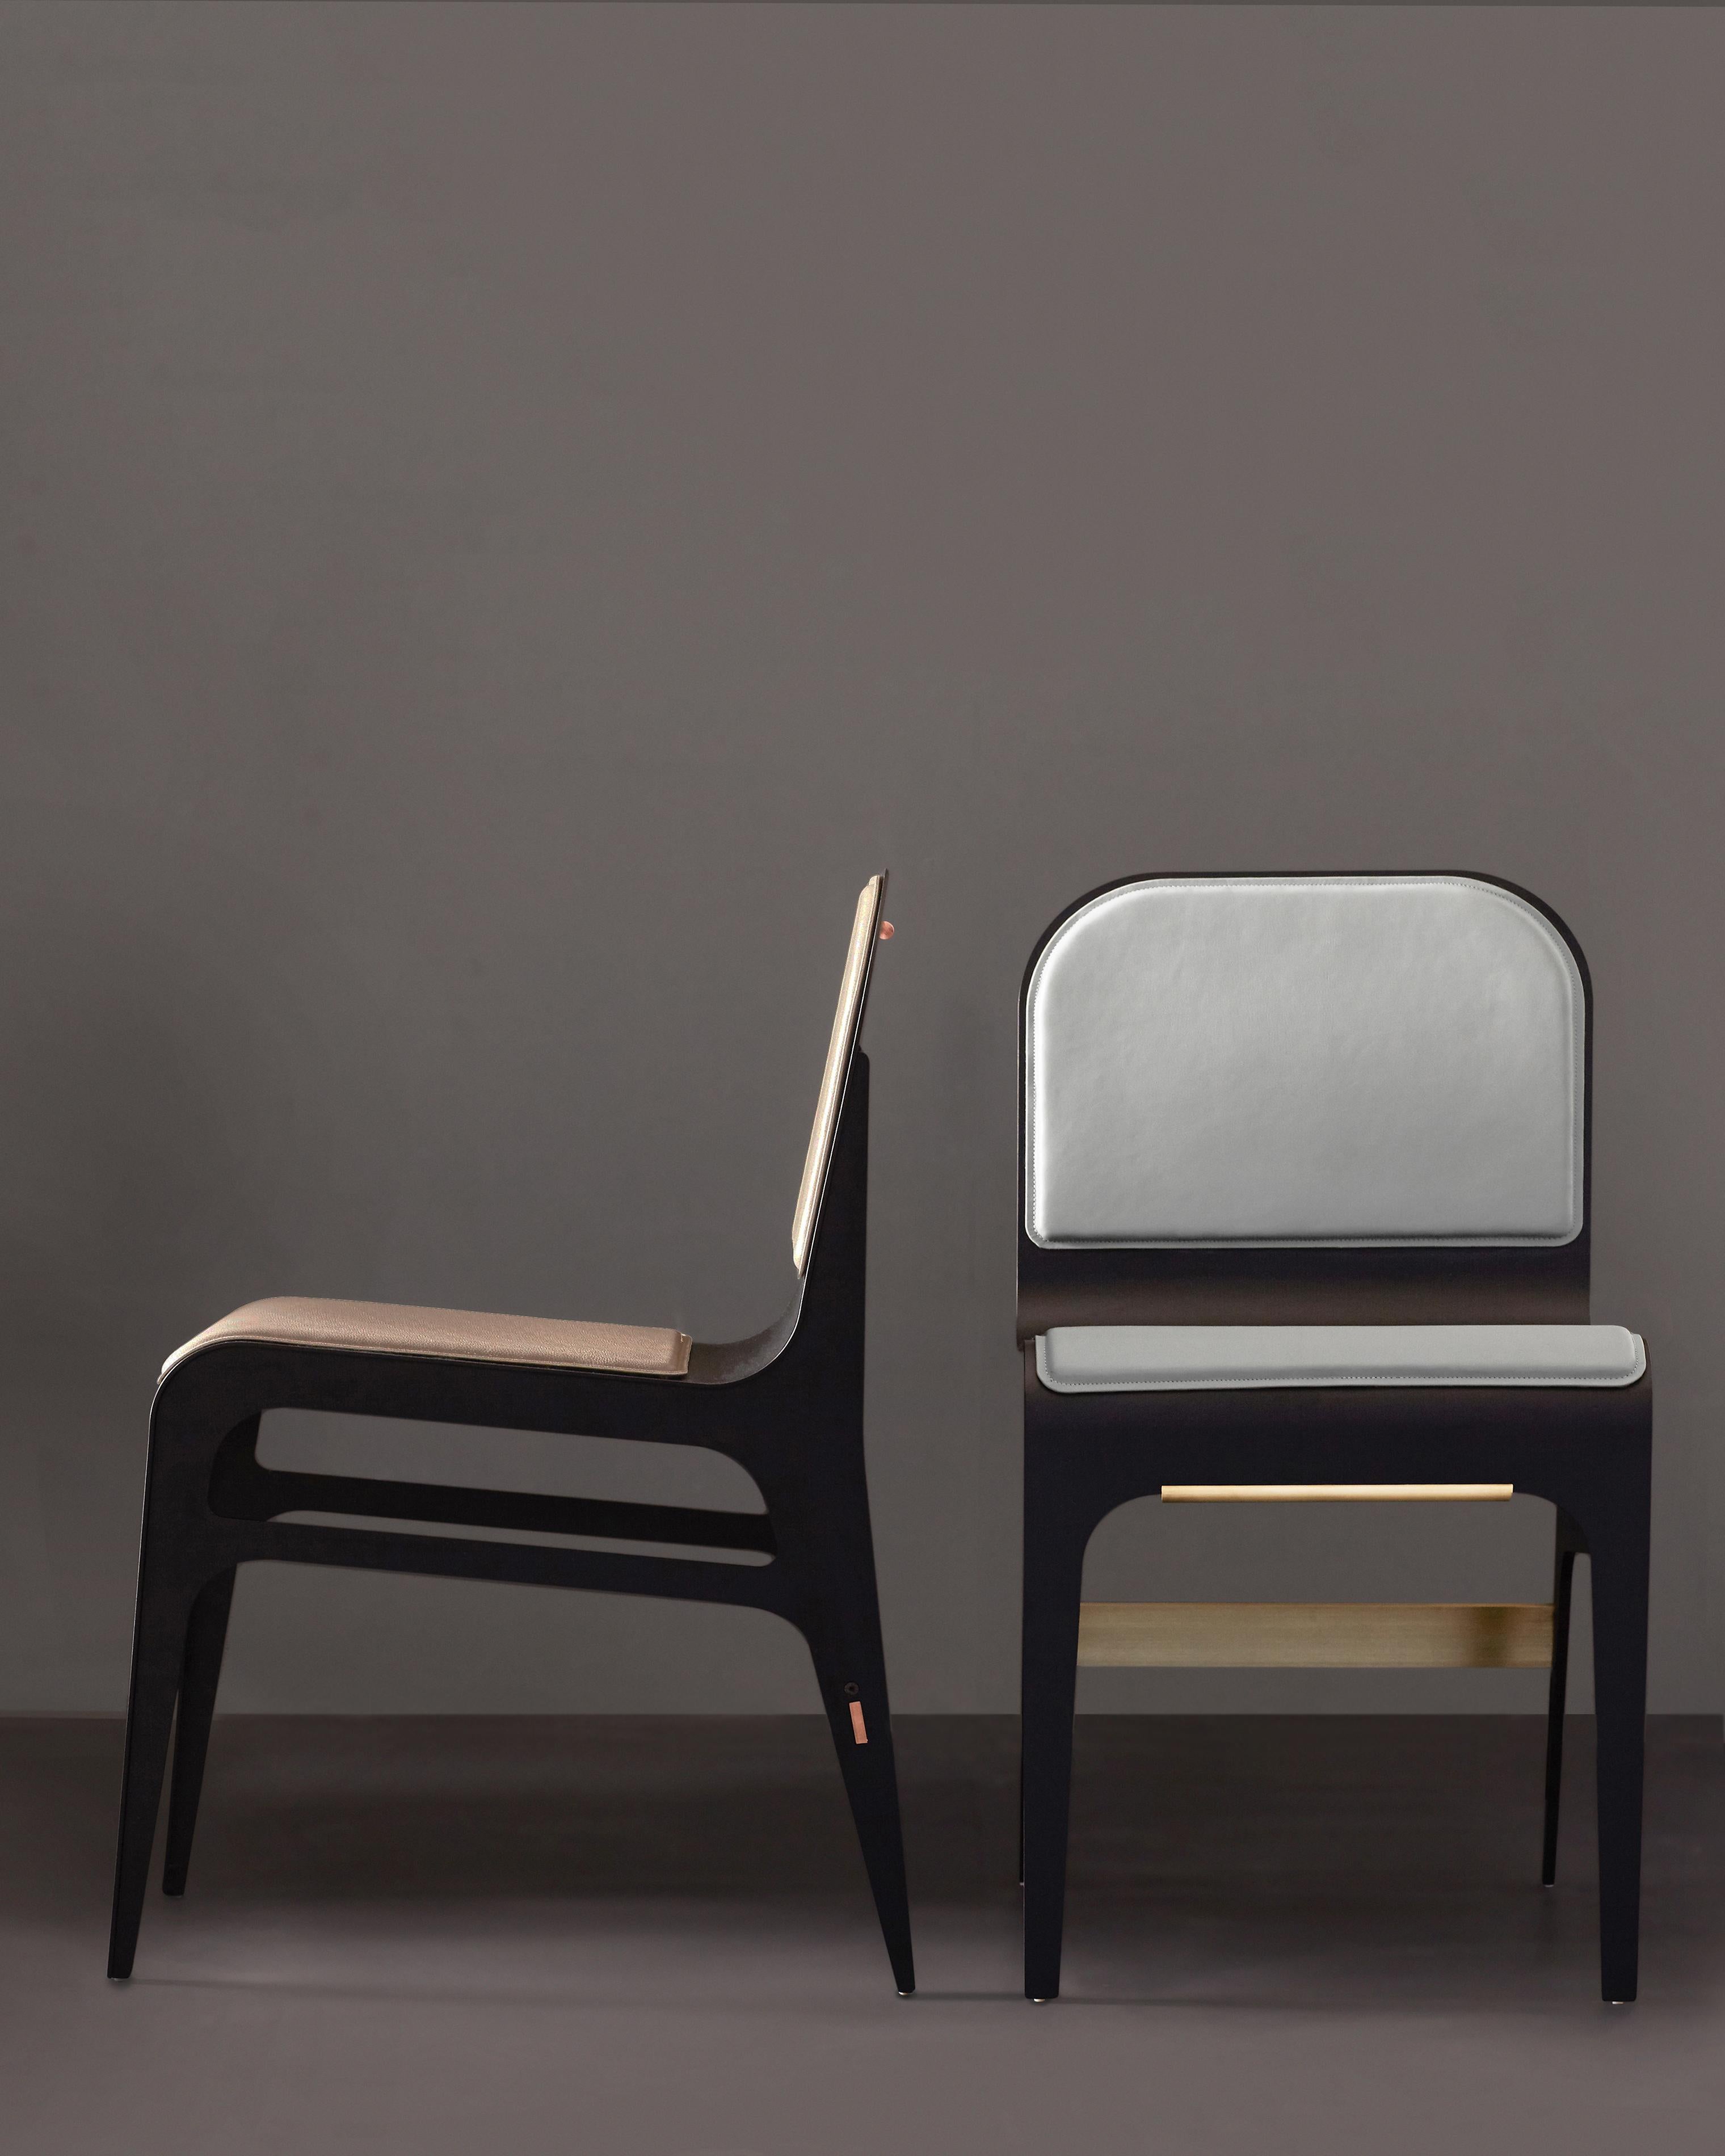 Canadian Bardot Dining Chair with Leather Seat and Satin Copper Hardware by Gabriel Scott